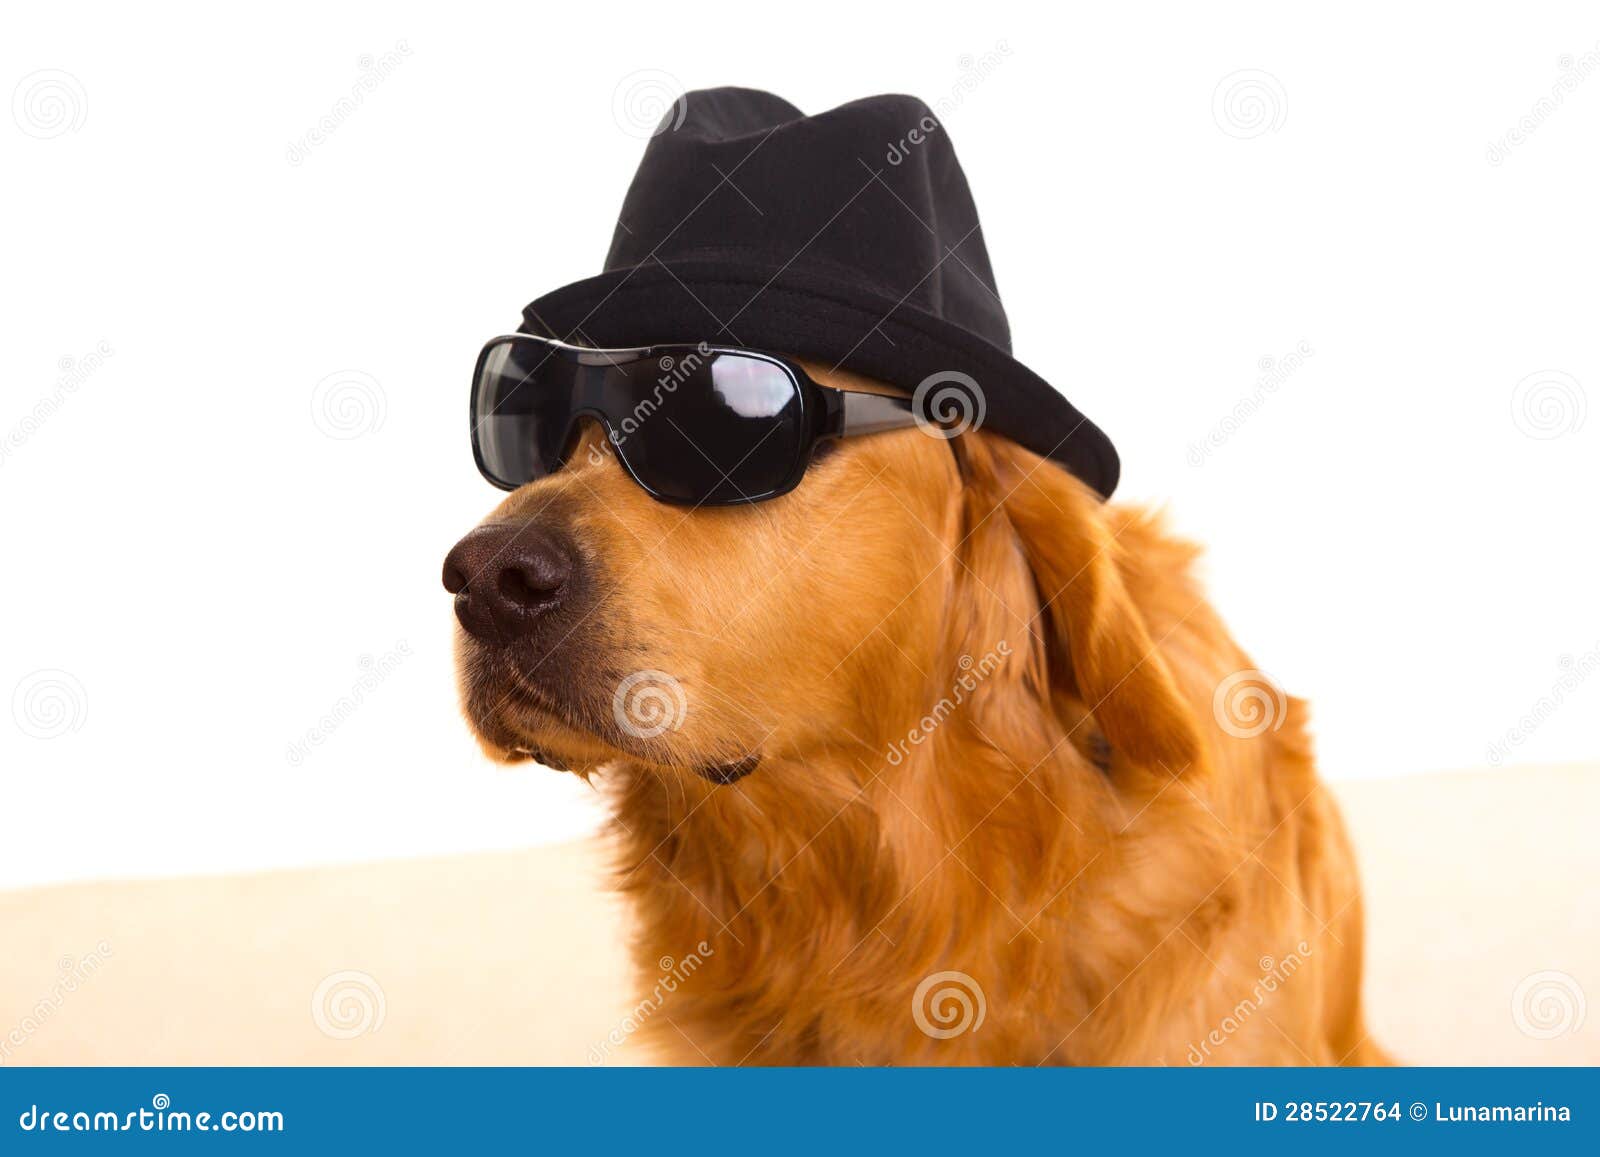 dog as mafia gangster with black hat and sunglasses